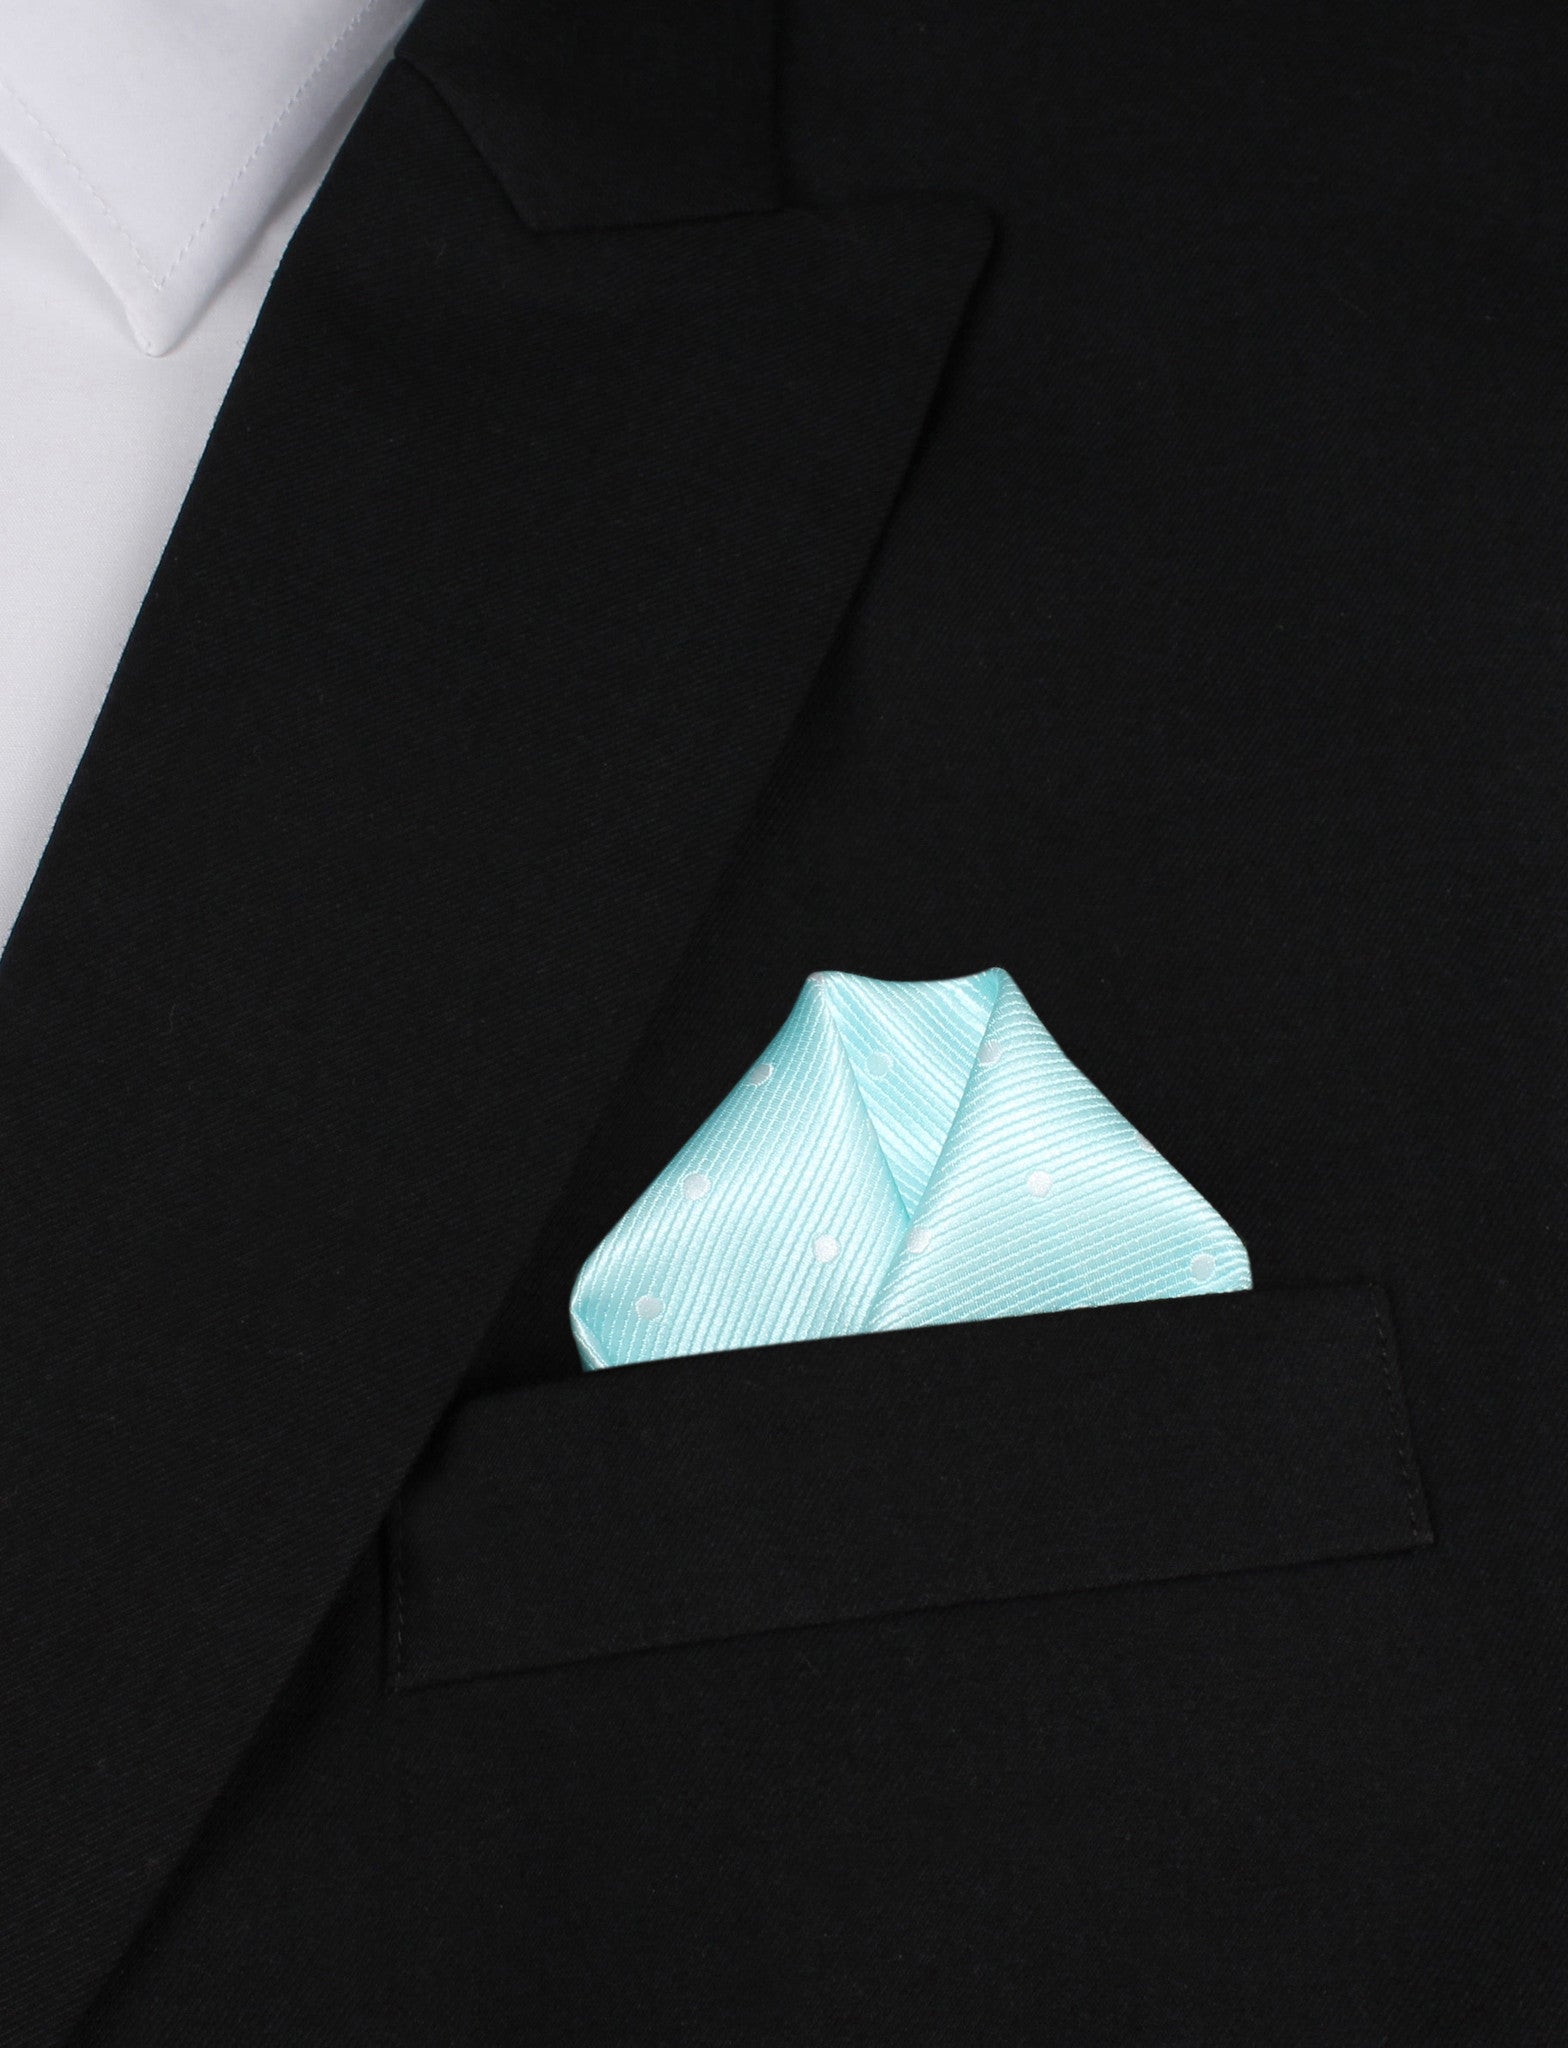 The OTAA Mint Blue with White Polka Dots Winged Puff Pocket Square Fold